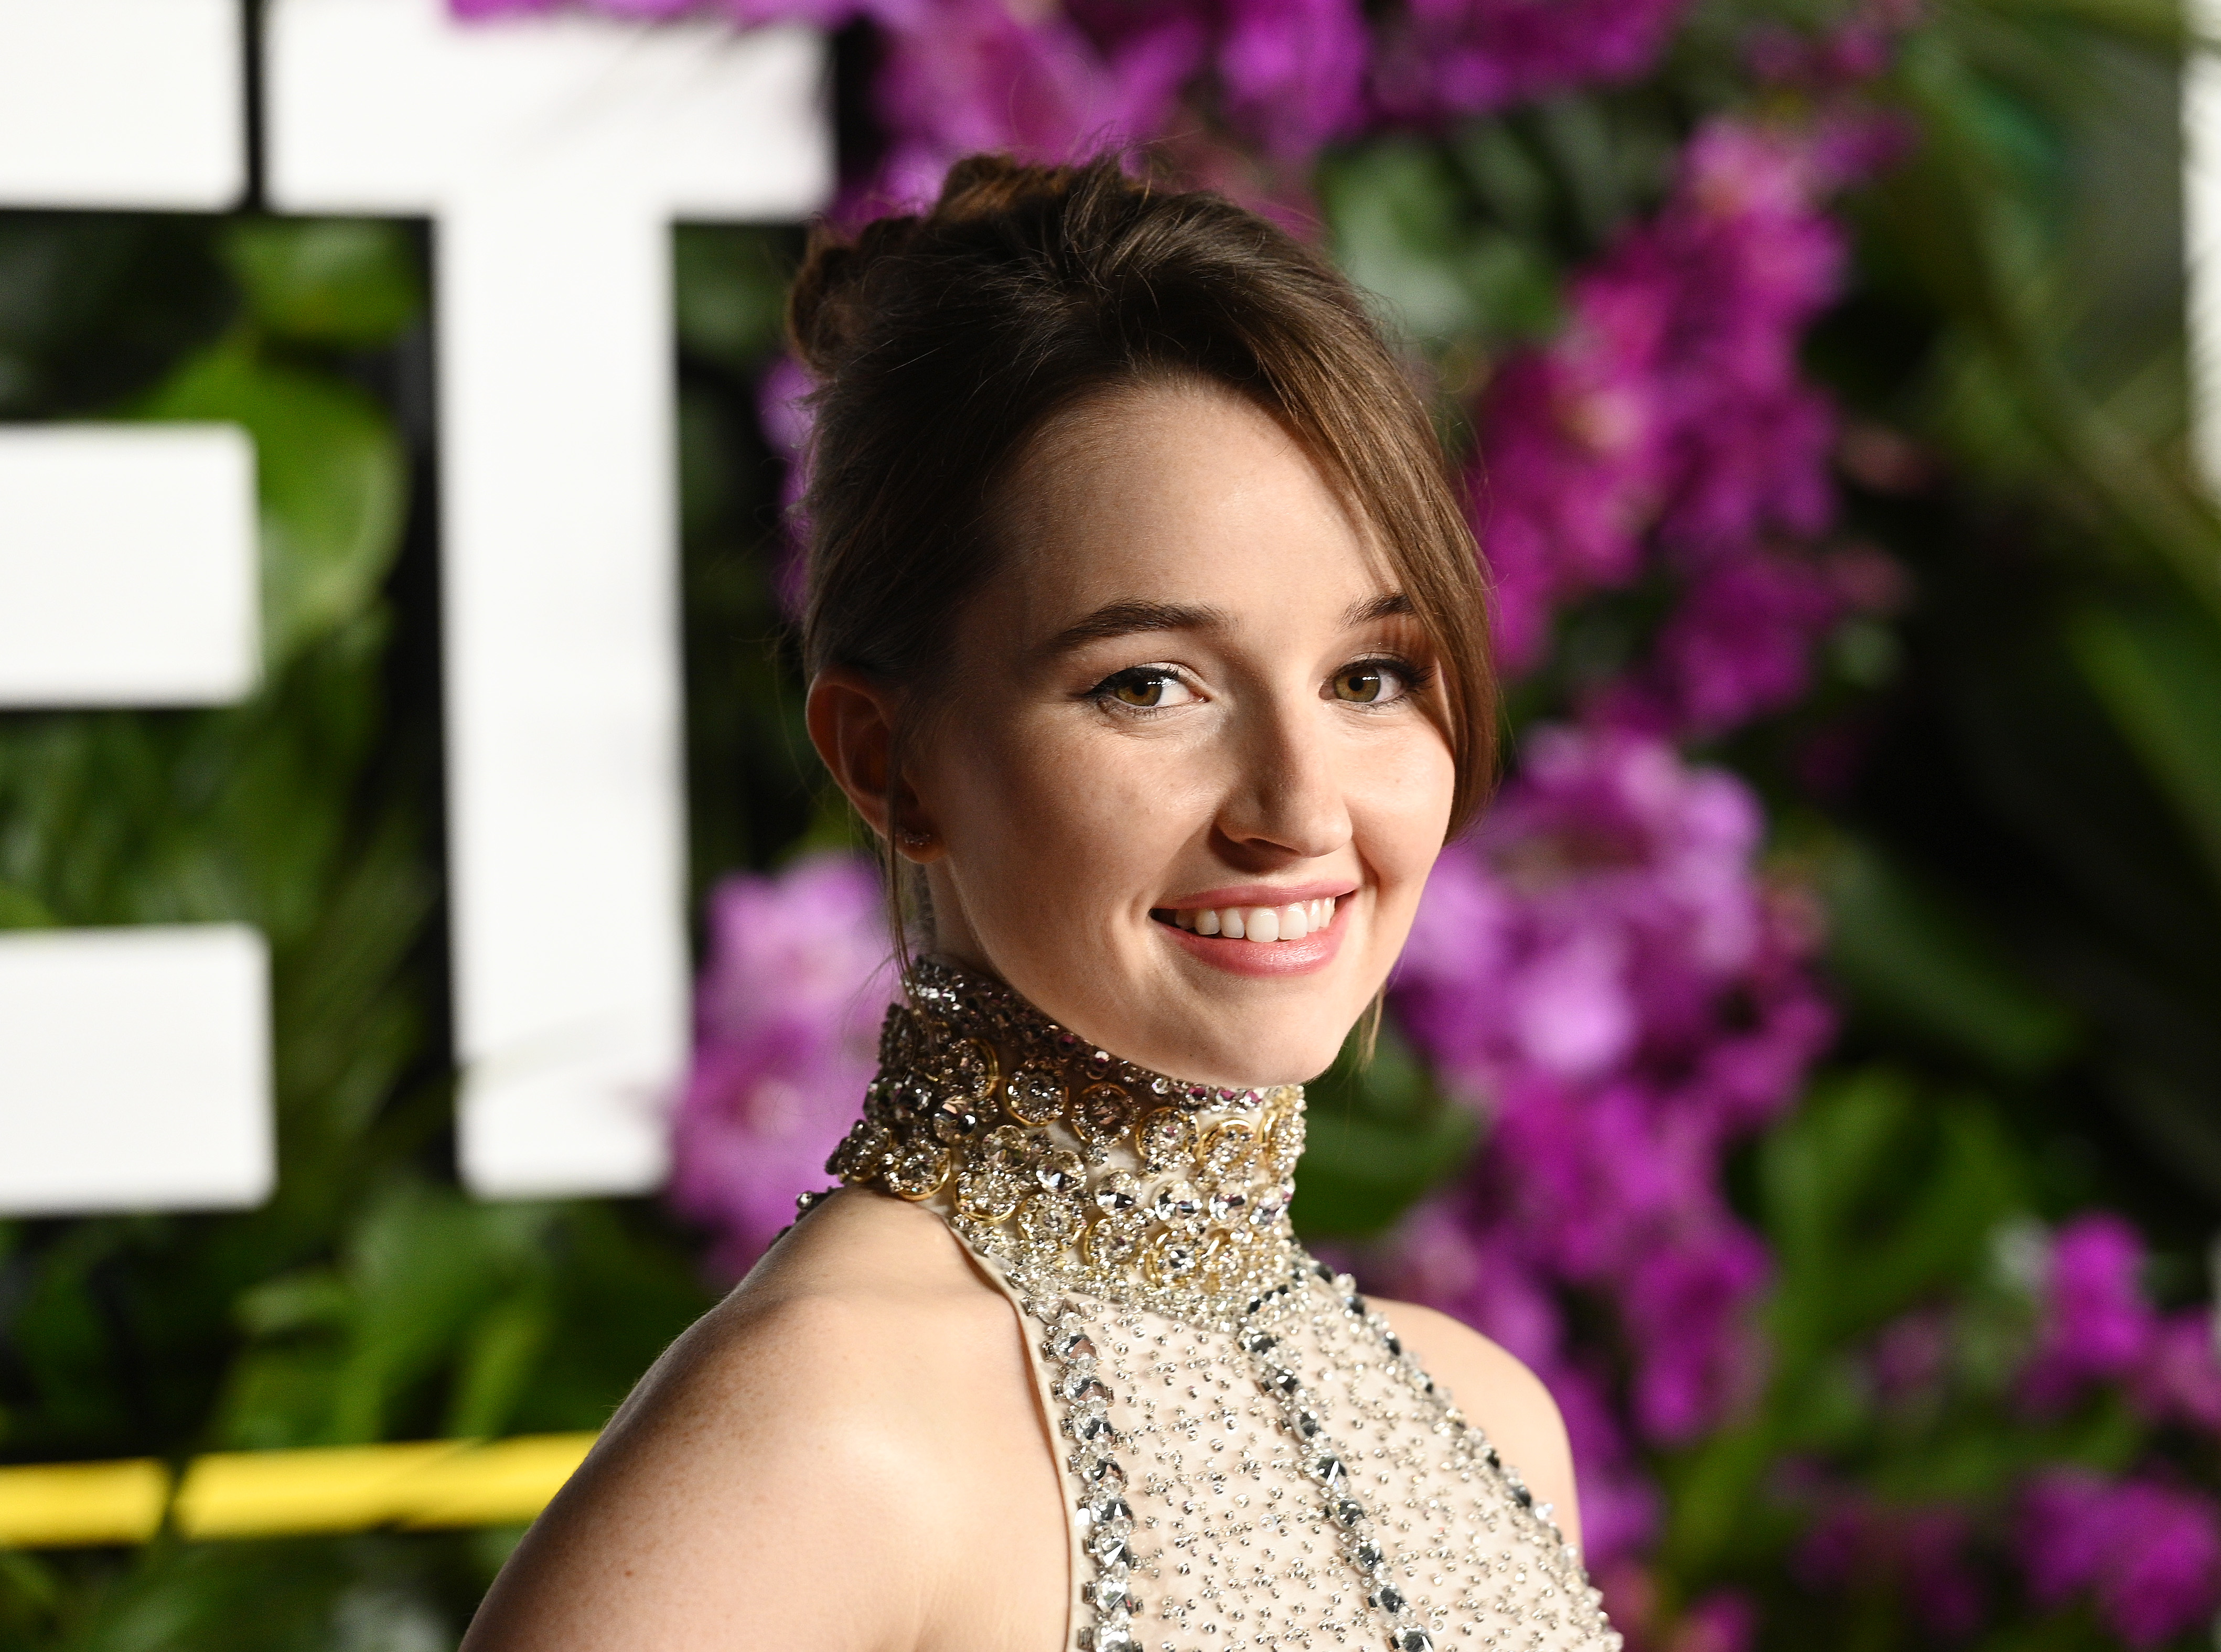 Kaitlyn Dever at "Ticket to Paradise" premiere held at the Regency Village Theatre on October 17, 2022, in Los Angeles, California. | Source: Getty Images